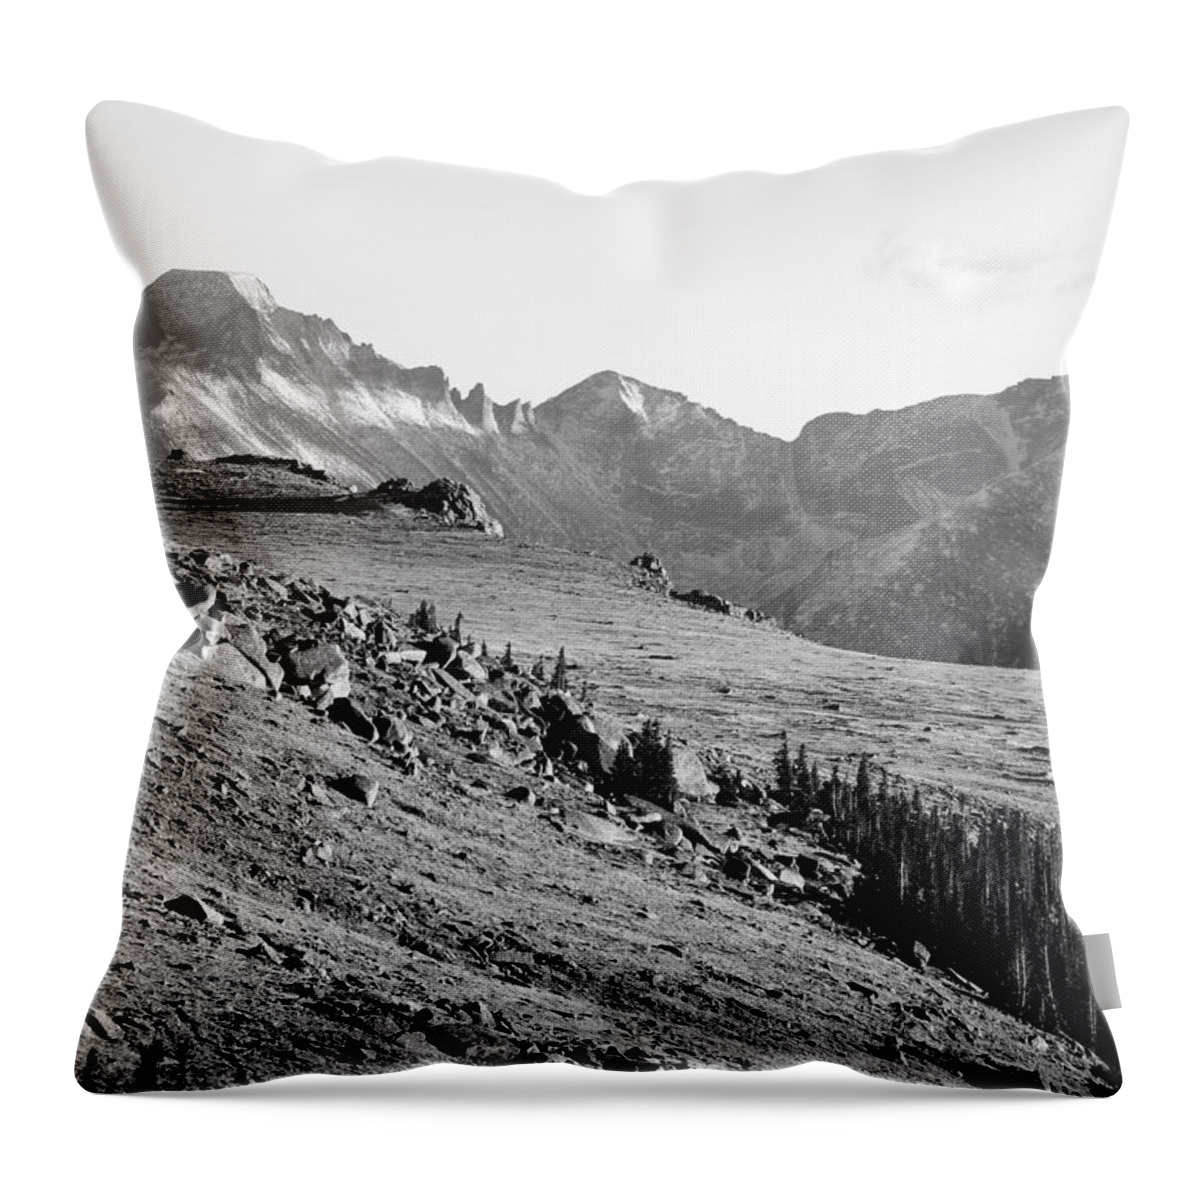 Trail Throw Pillow featuring the photograph Trail Ridge Road 11/2016 by Nicole Belvill